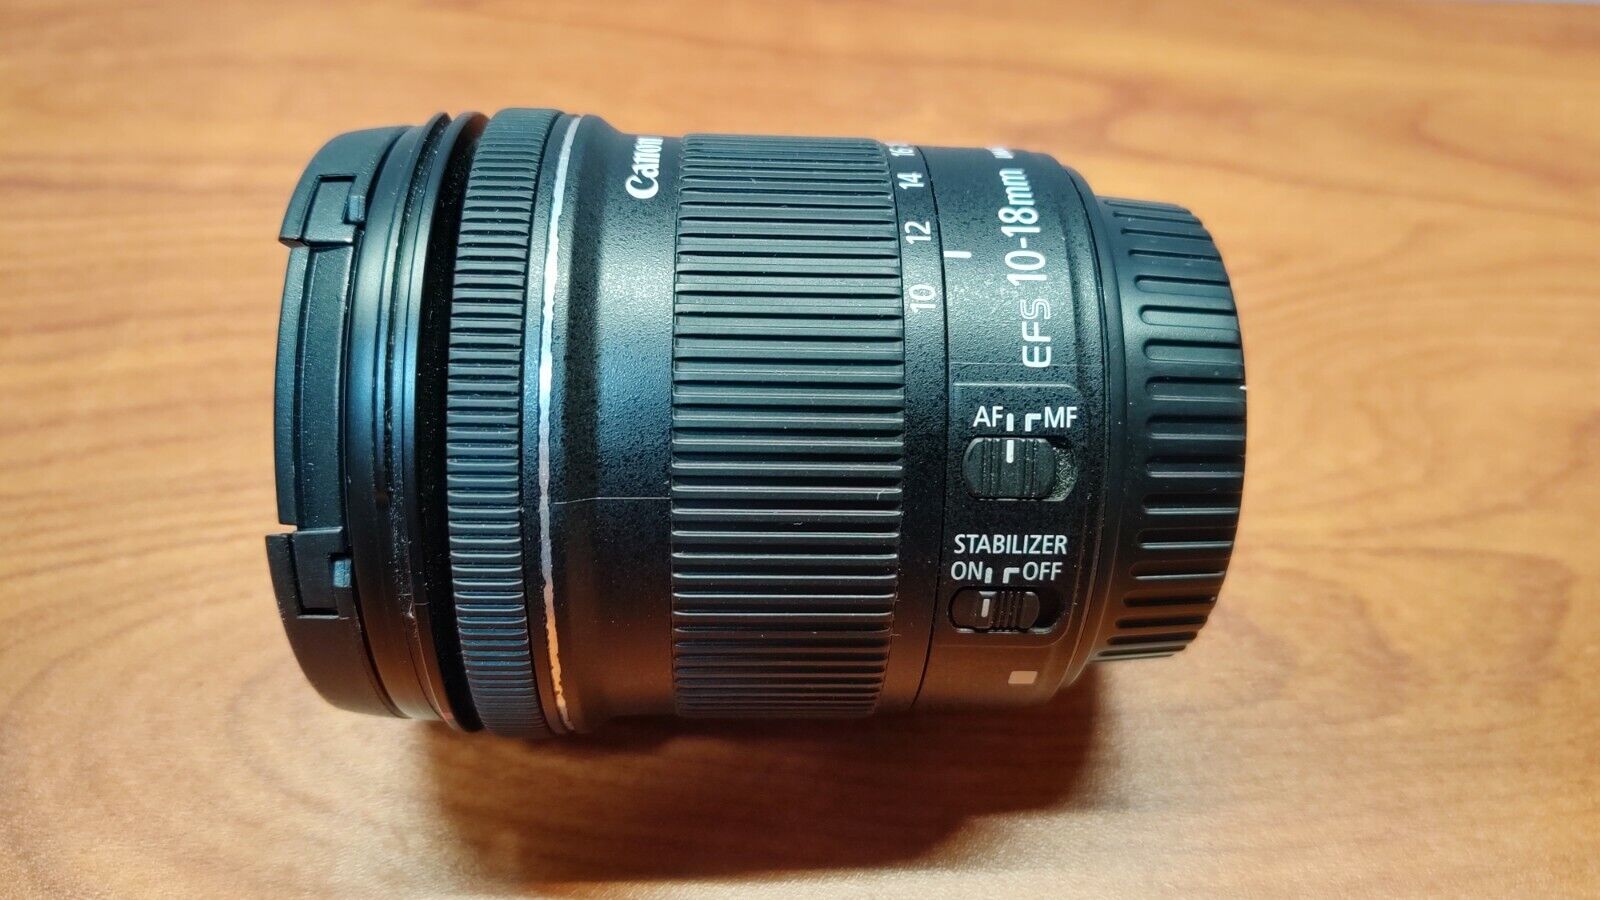 B GRADE Canon EF-S 10-18mm F/4.5-5.6 IS STM Lens Auto/Manual Focus - Stabilizer